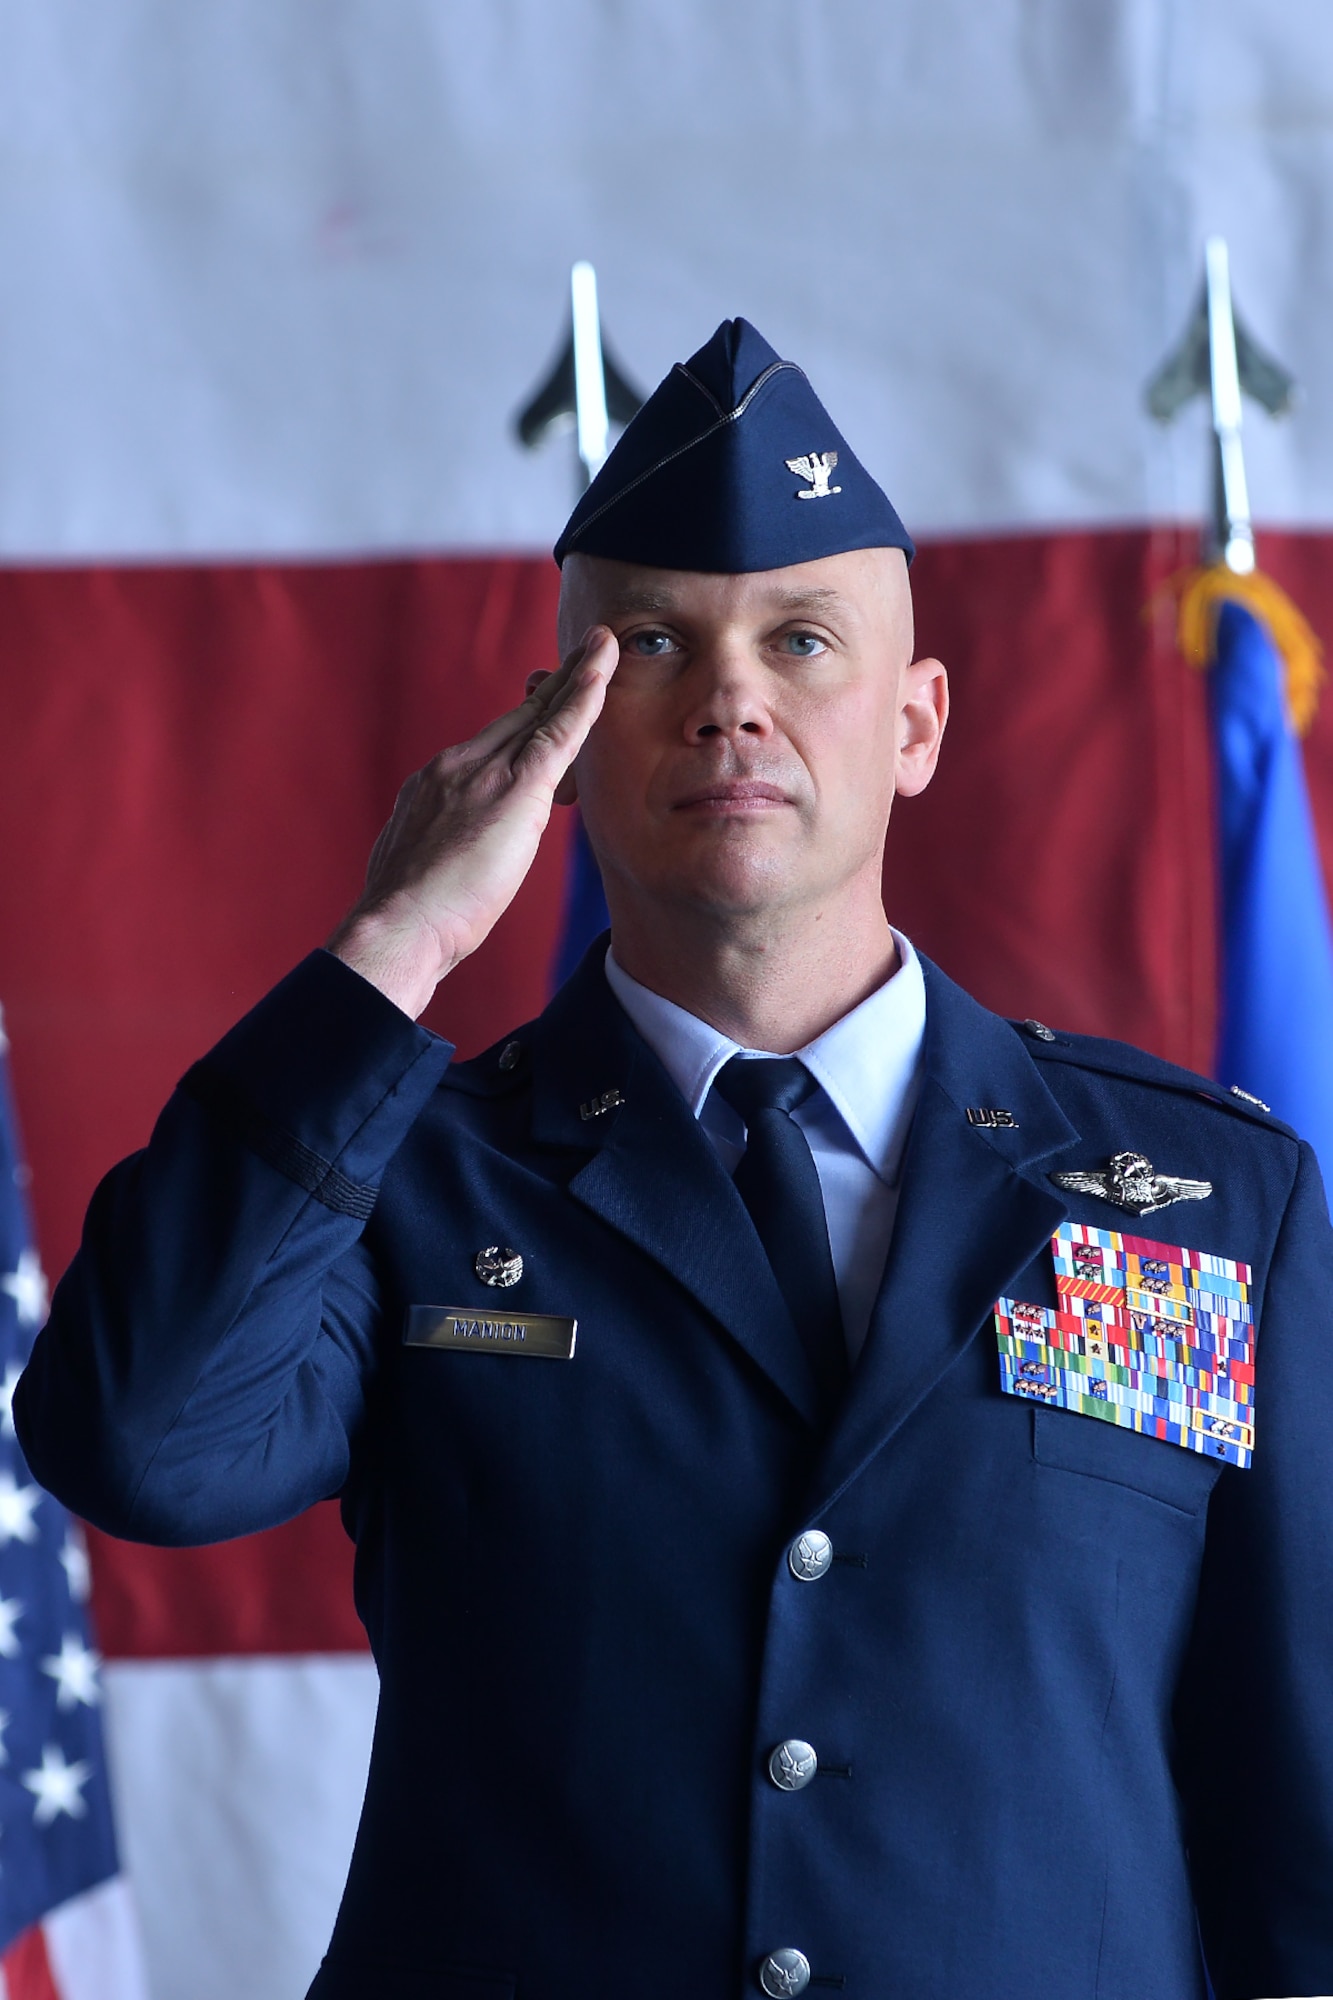 Col. Michael Manion renders his first salute as the 55th Wing commander during the 55th Wing change of command ceremony in Dock 1 of the Bennie Davis Maintenance Facility on Offutt Air Force Base, Neb., June 8. The Fightin' Fifty-Fifth said farewell to Col. Marty Reynolds and welcomed Col. Manion.